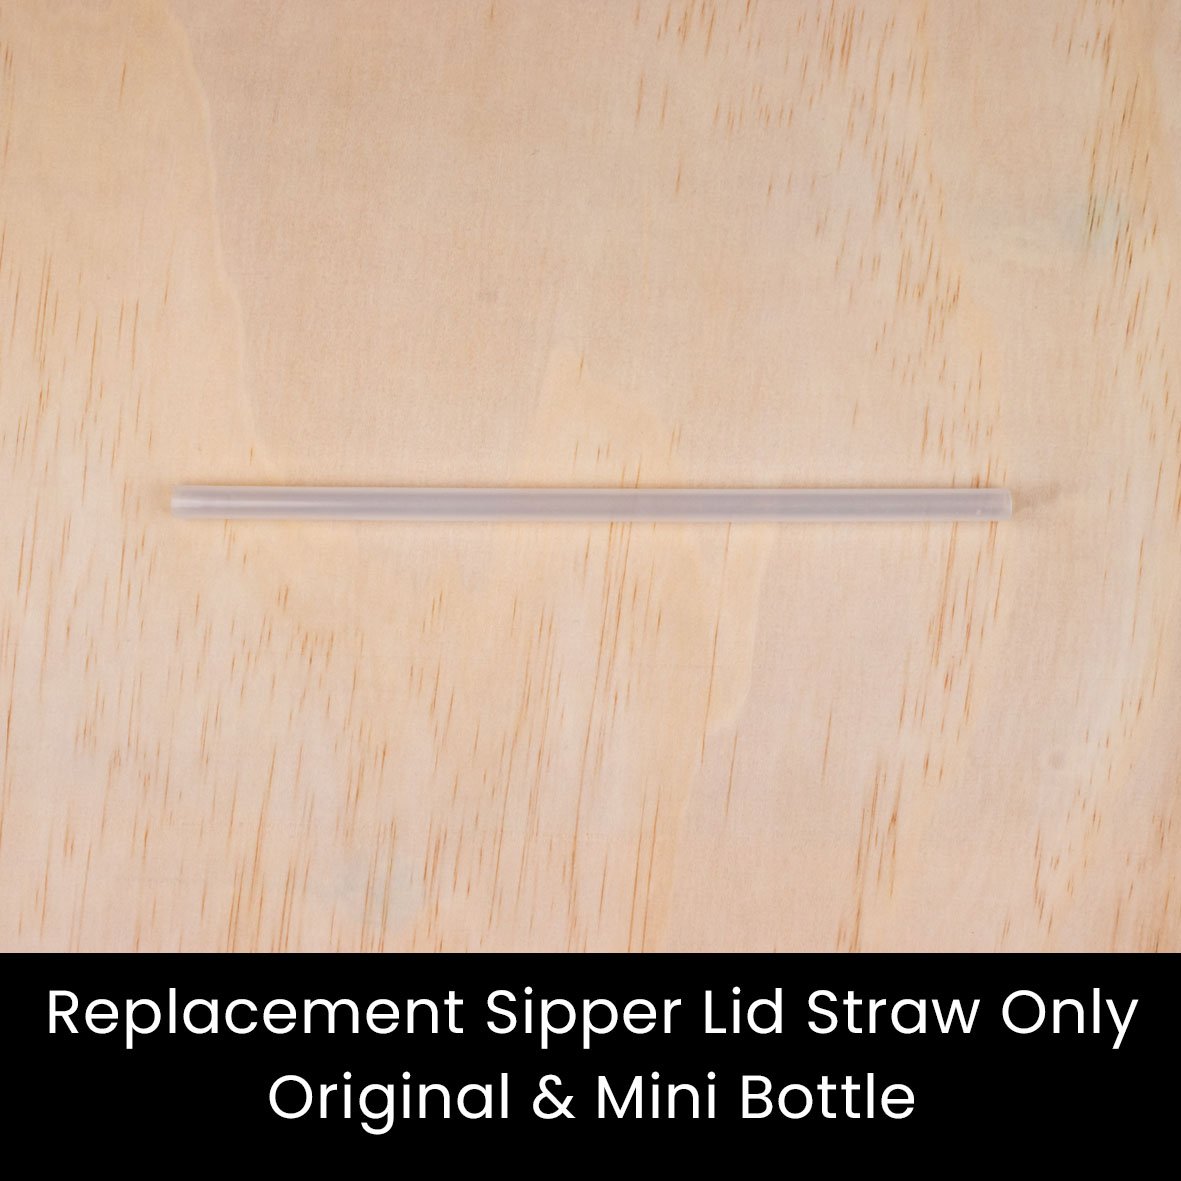 MontiiCo Sipper Straw for Sipper Lid Original / Mini Bottle